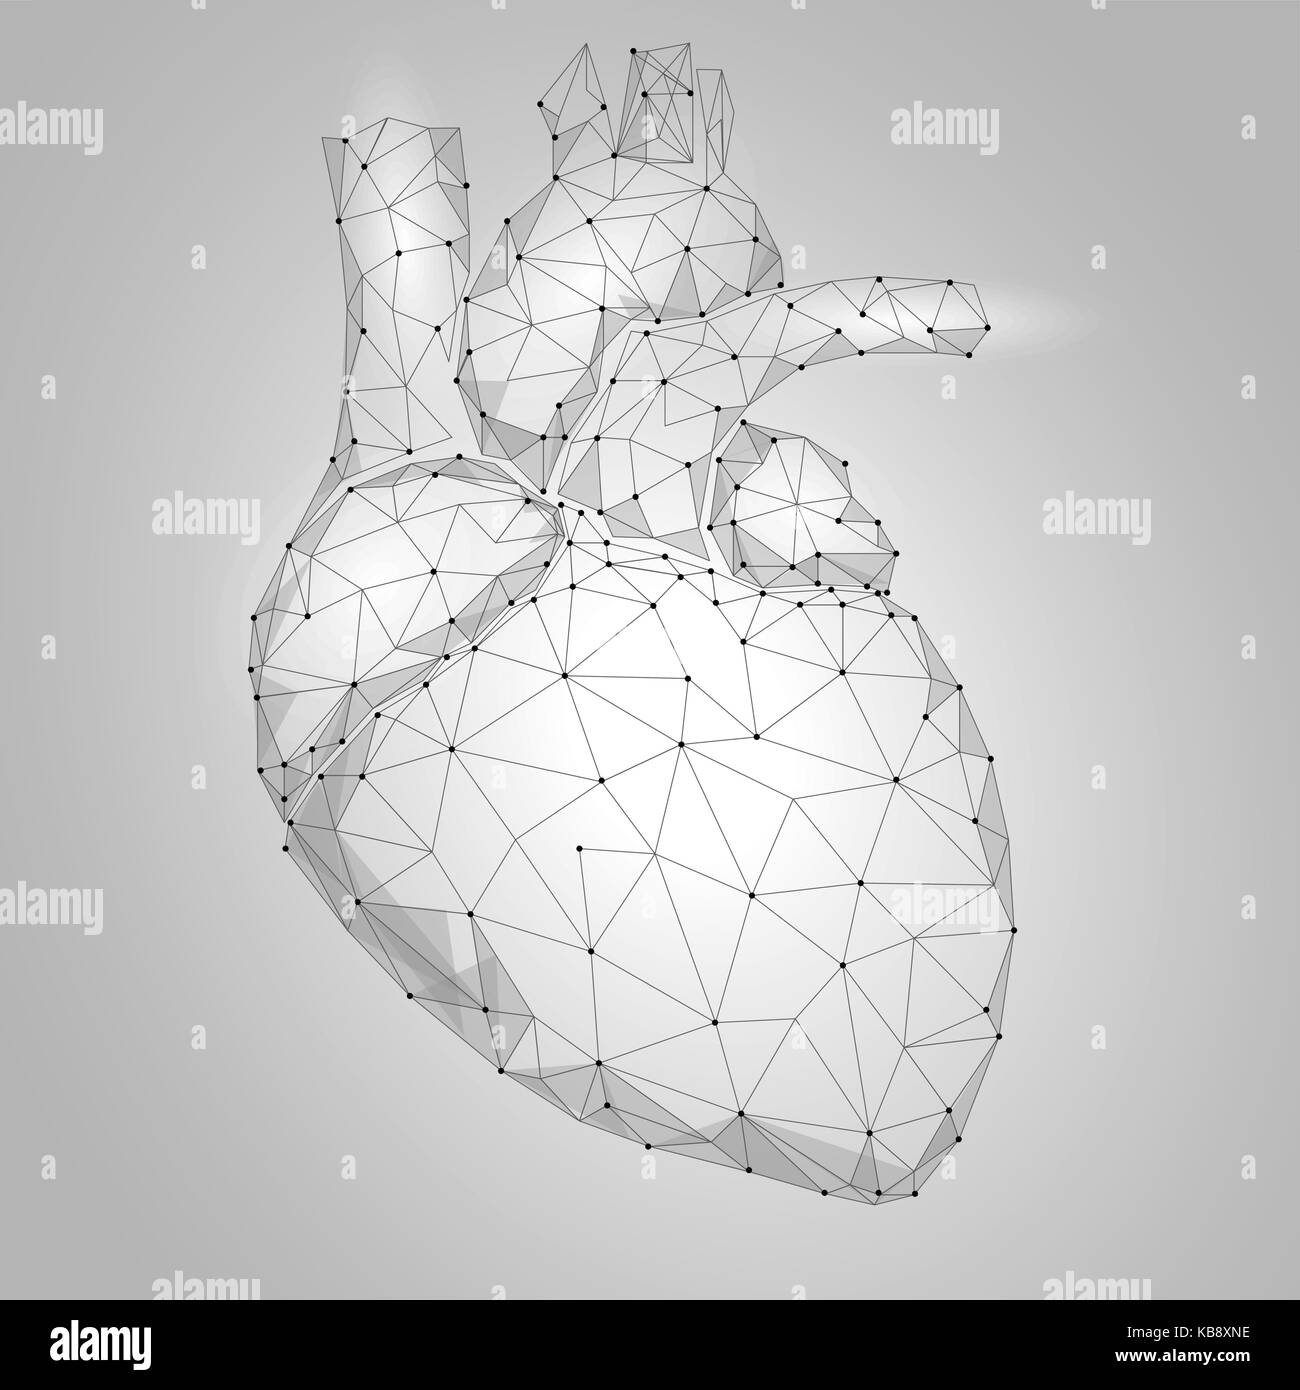 Human Heart Internal Organ Triangle Low Poly. Connected dots white gray neutral color technology 3d model medicine healthy body part vector illustration Stock Vector